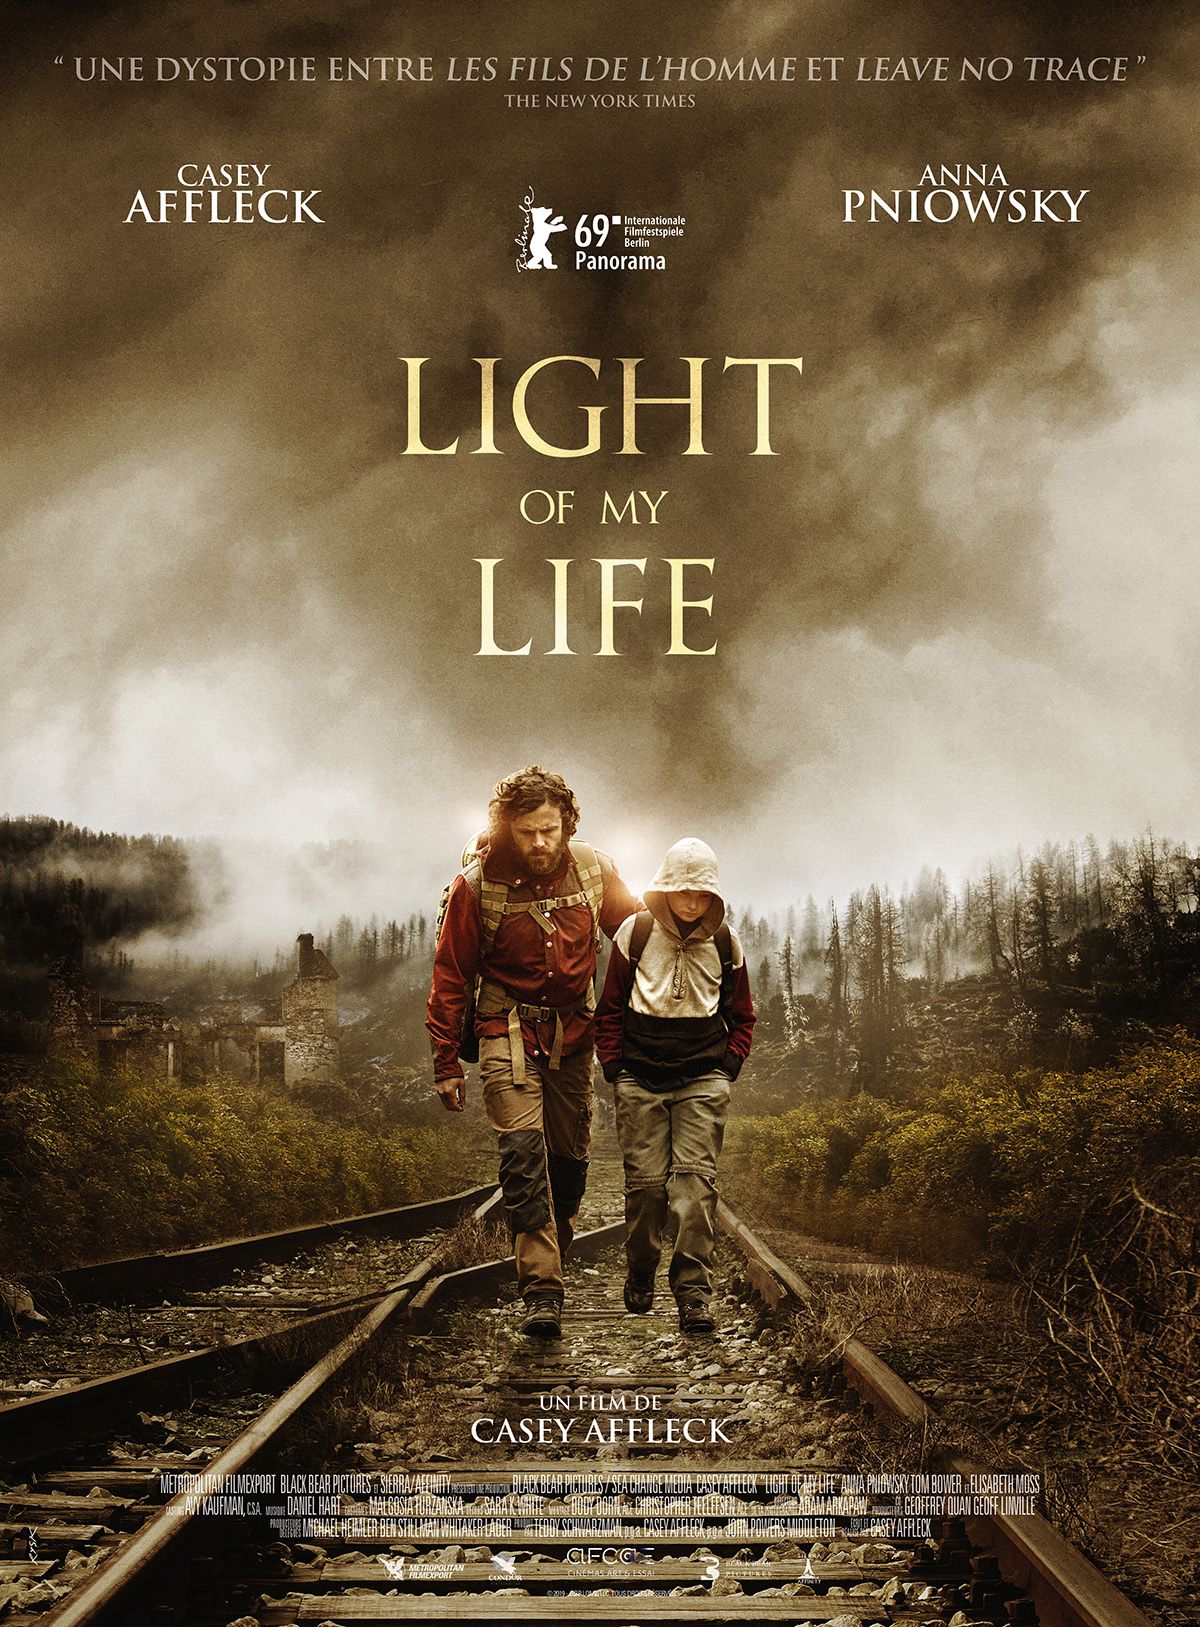 Light of My Life - Film (2020) streaming VF gratuit complet